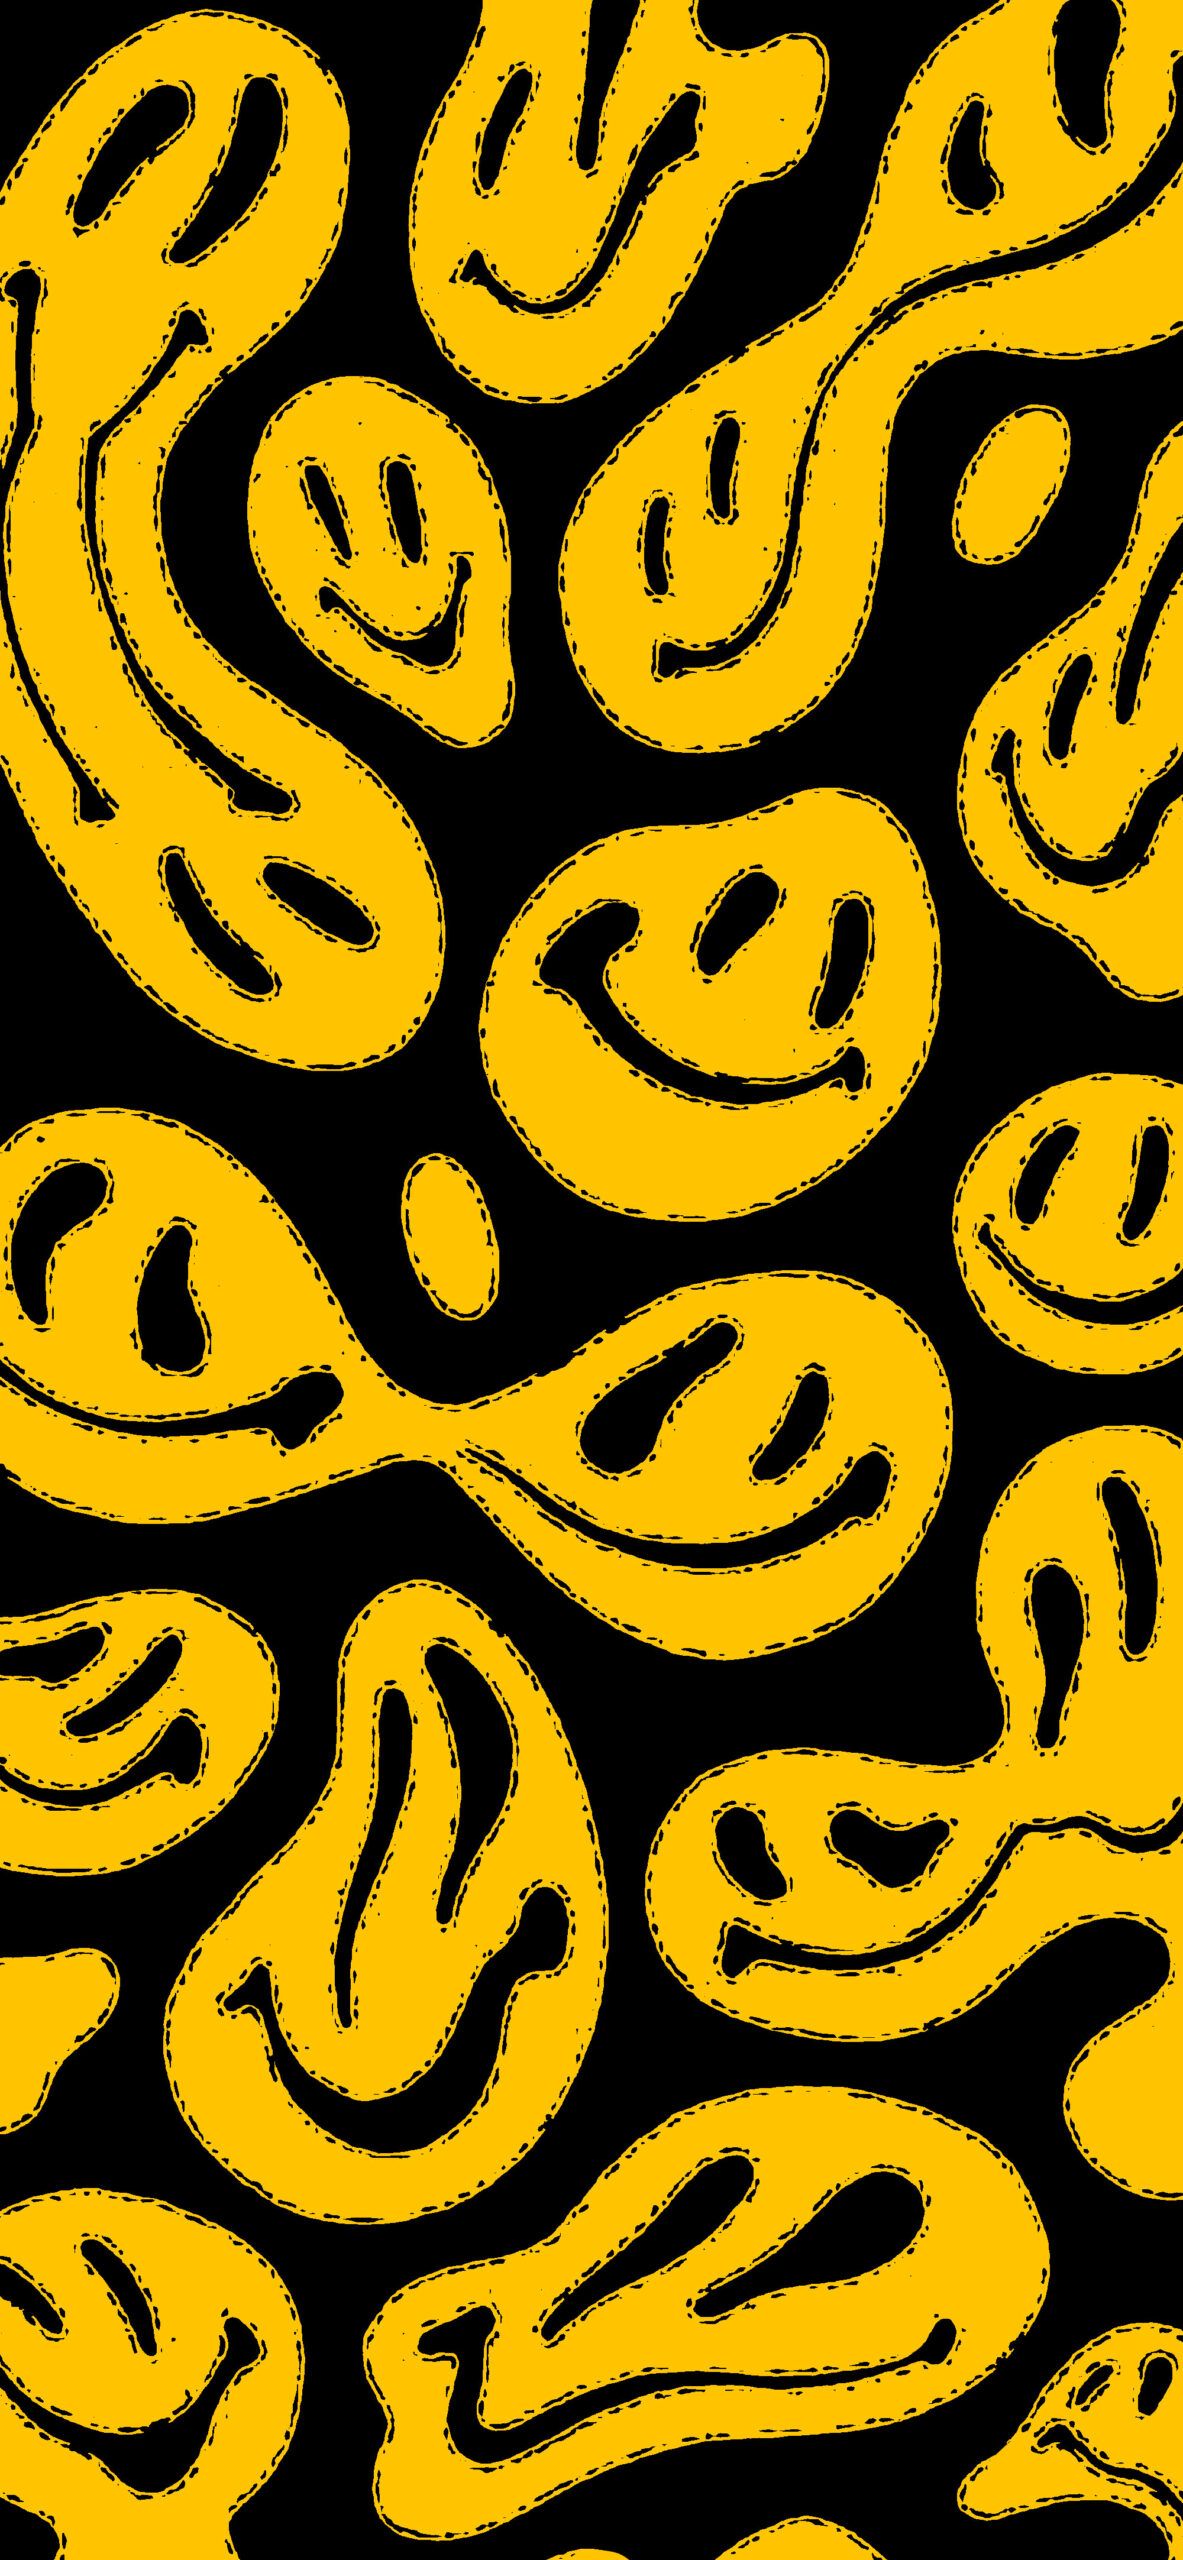 A yellow and black pattern of smiley faces - Smile, yellow iphone, dark